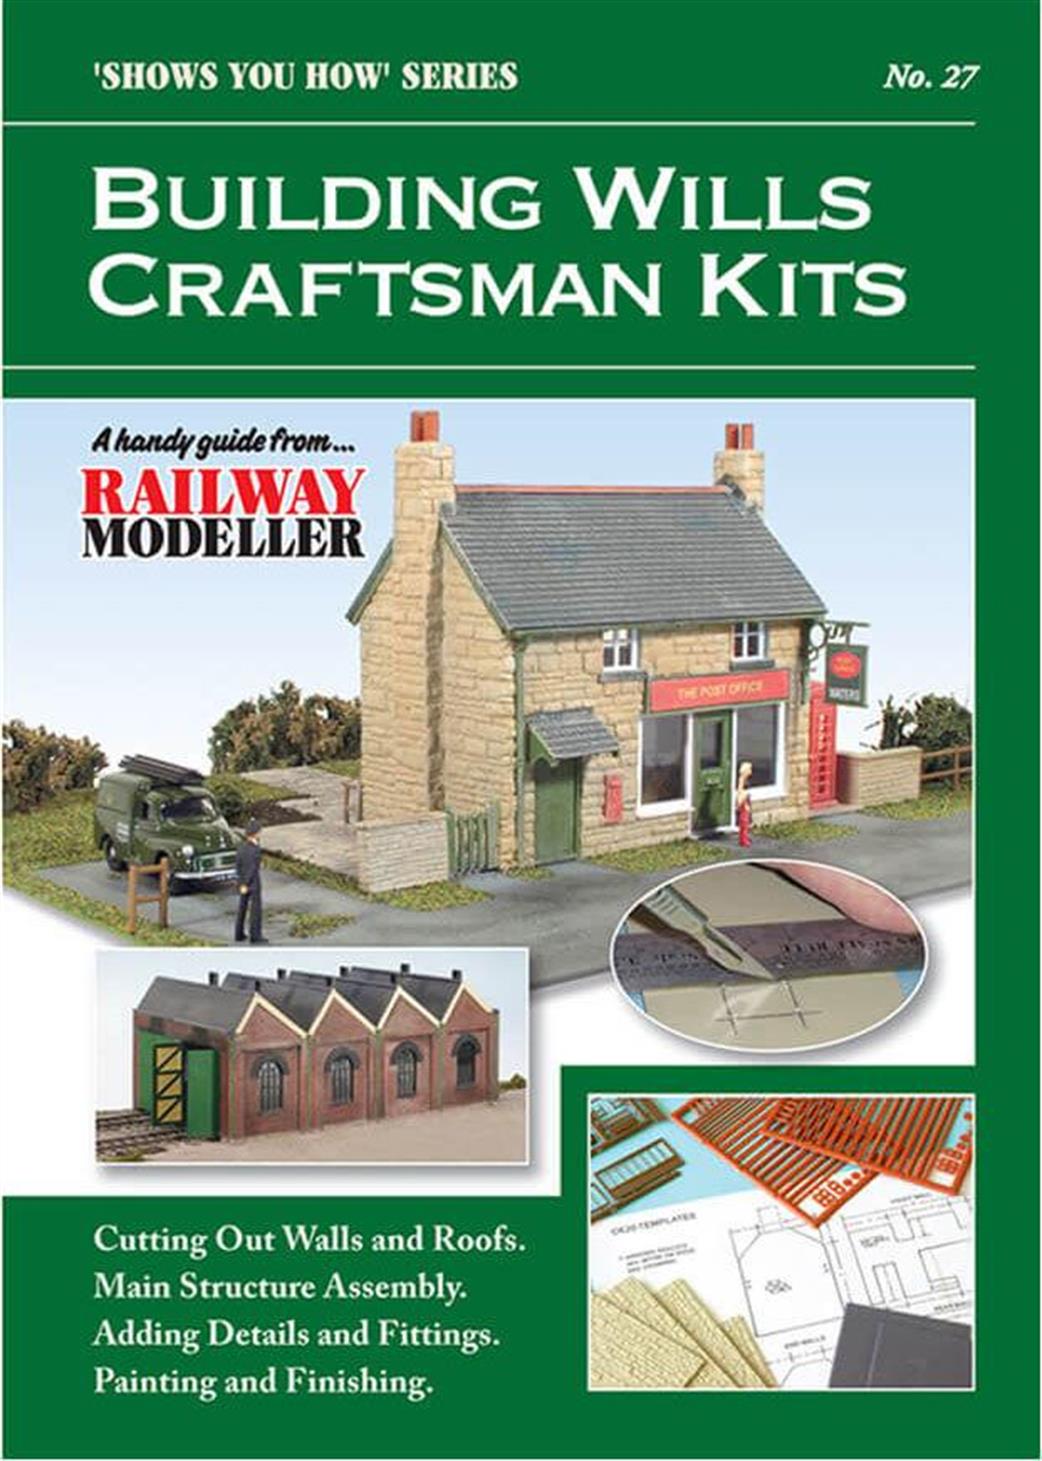 Peco SYH 27 Shows You How 27 Building Wills Craftsman Kits